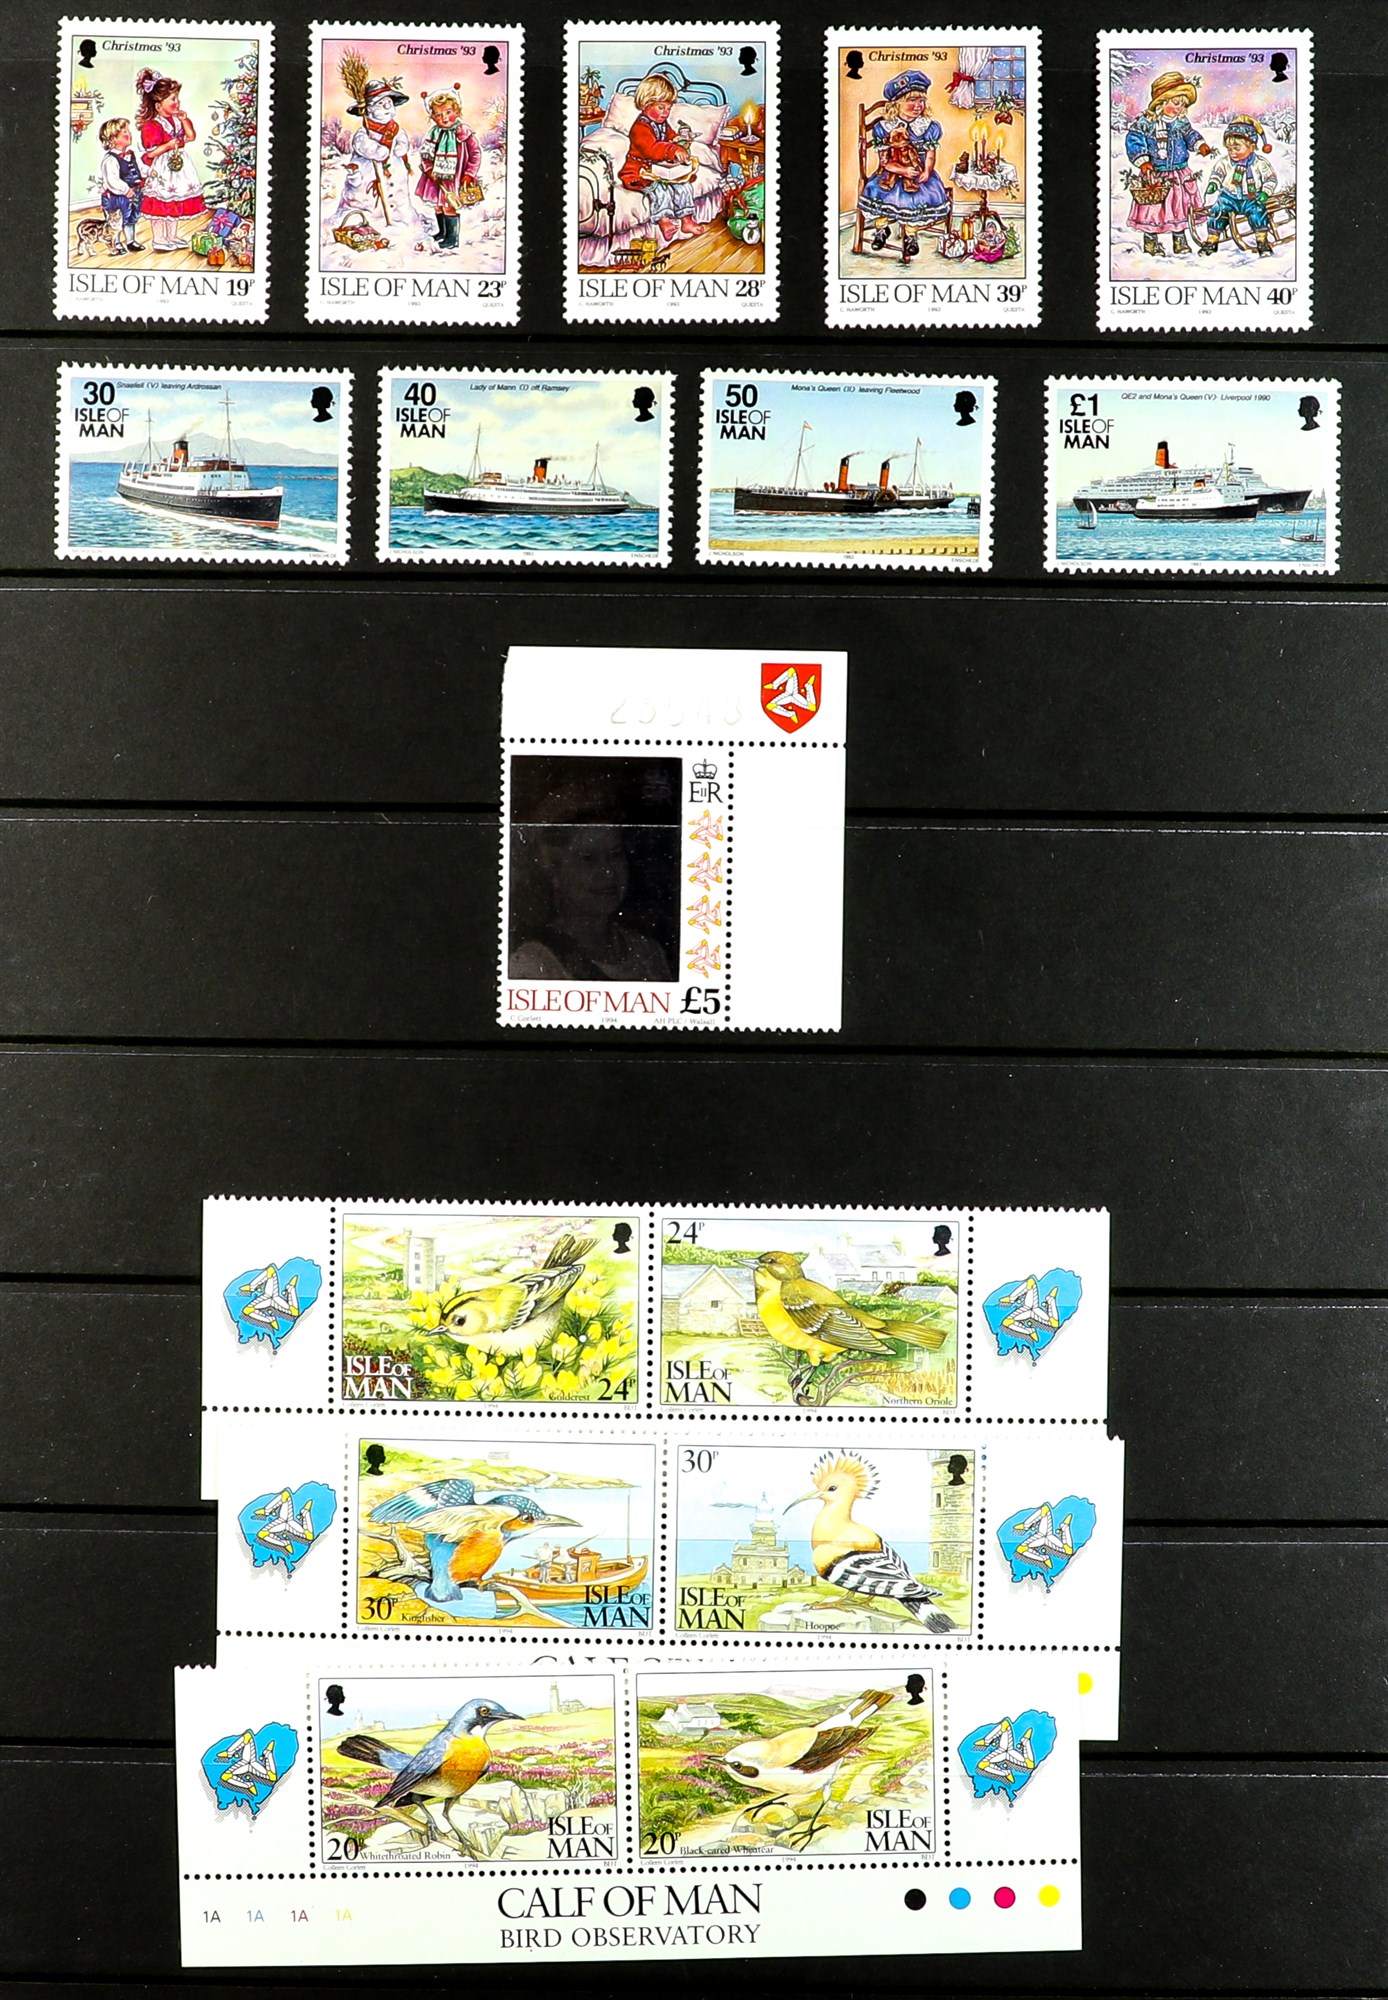 GB.ISLANDS ISLE OF MAN 1990 - 2008 NEVER HINGED MINT collection with light duplication on protective - Image 7 of 10